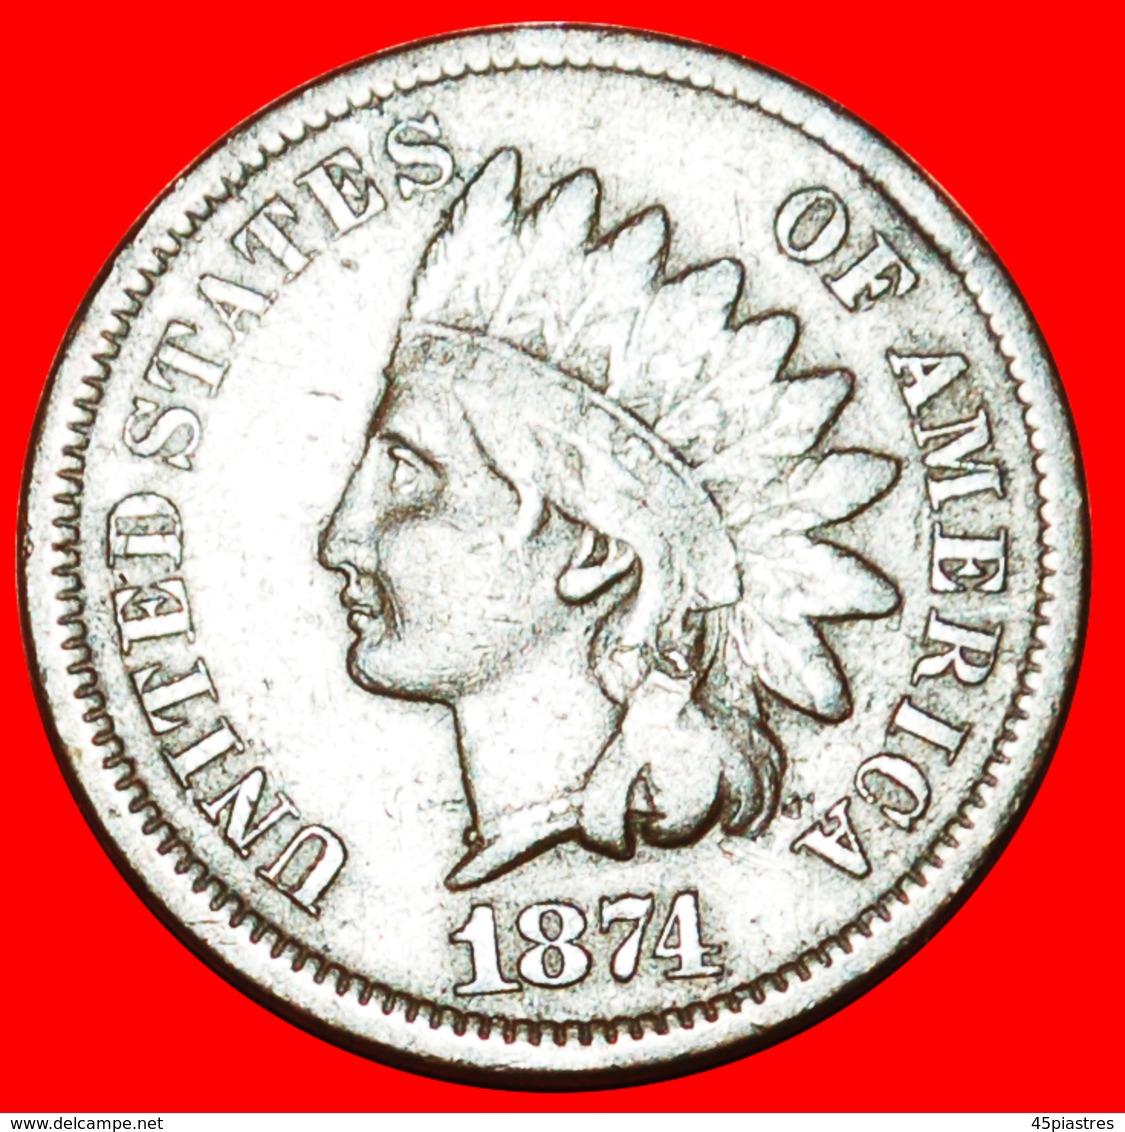 √ INDIAN HEAD (1859-1909): USA ★ 1 CENT 1874 UNCOMMON! LOW START ★ NO RESERVE! - 1859-1909: Indian Head